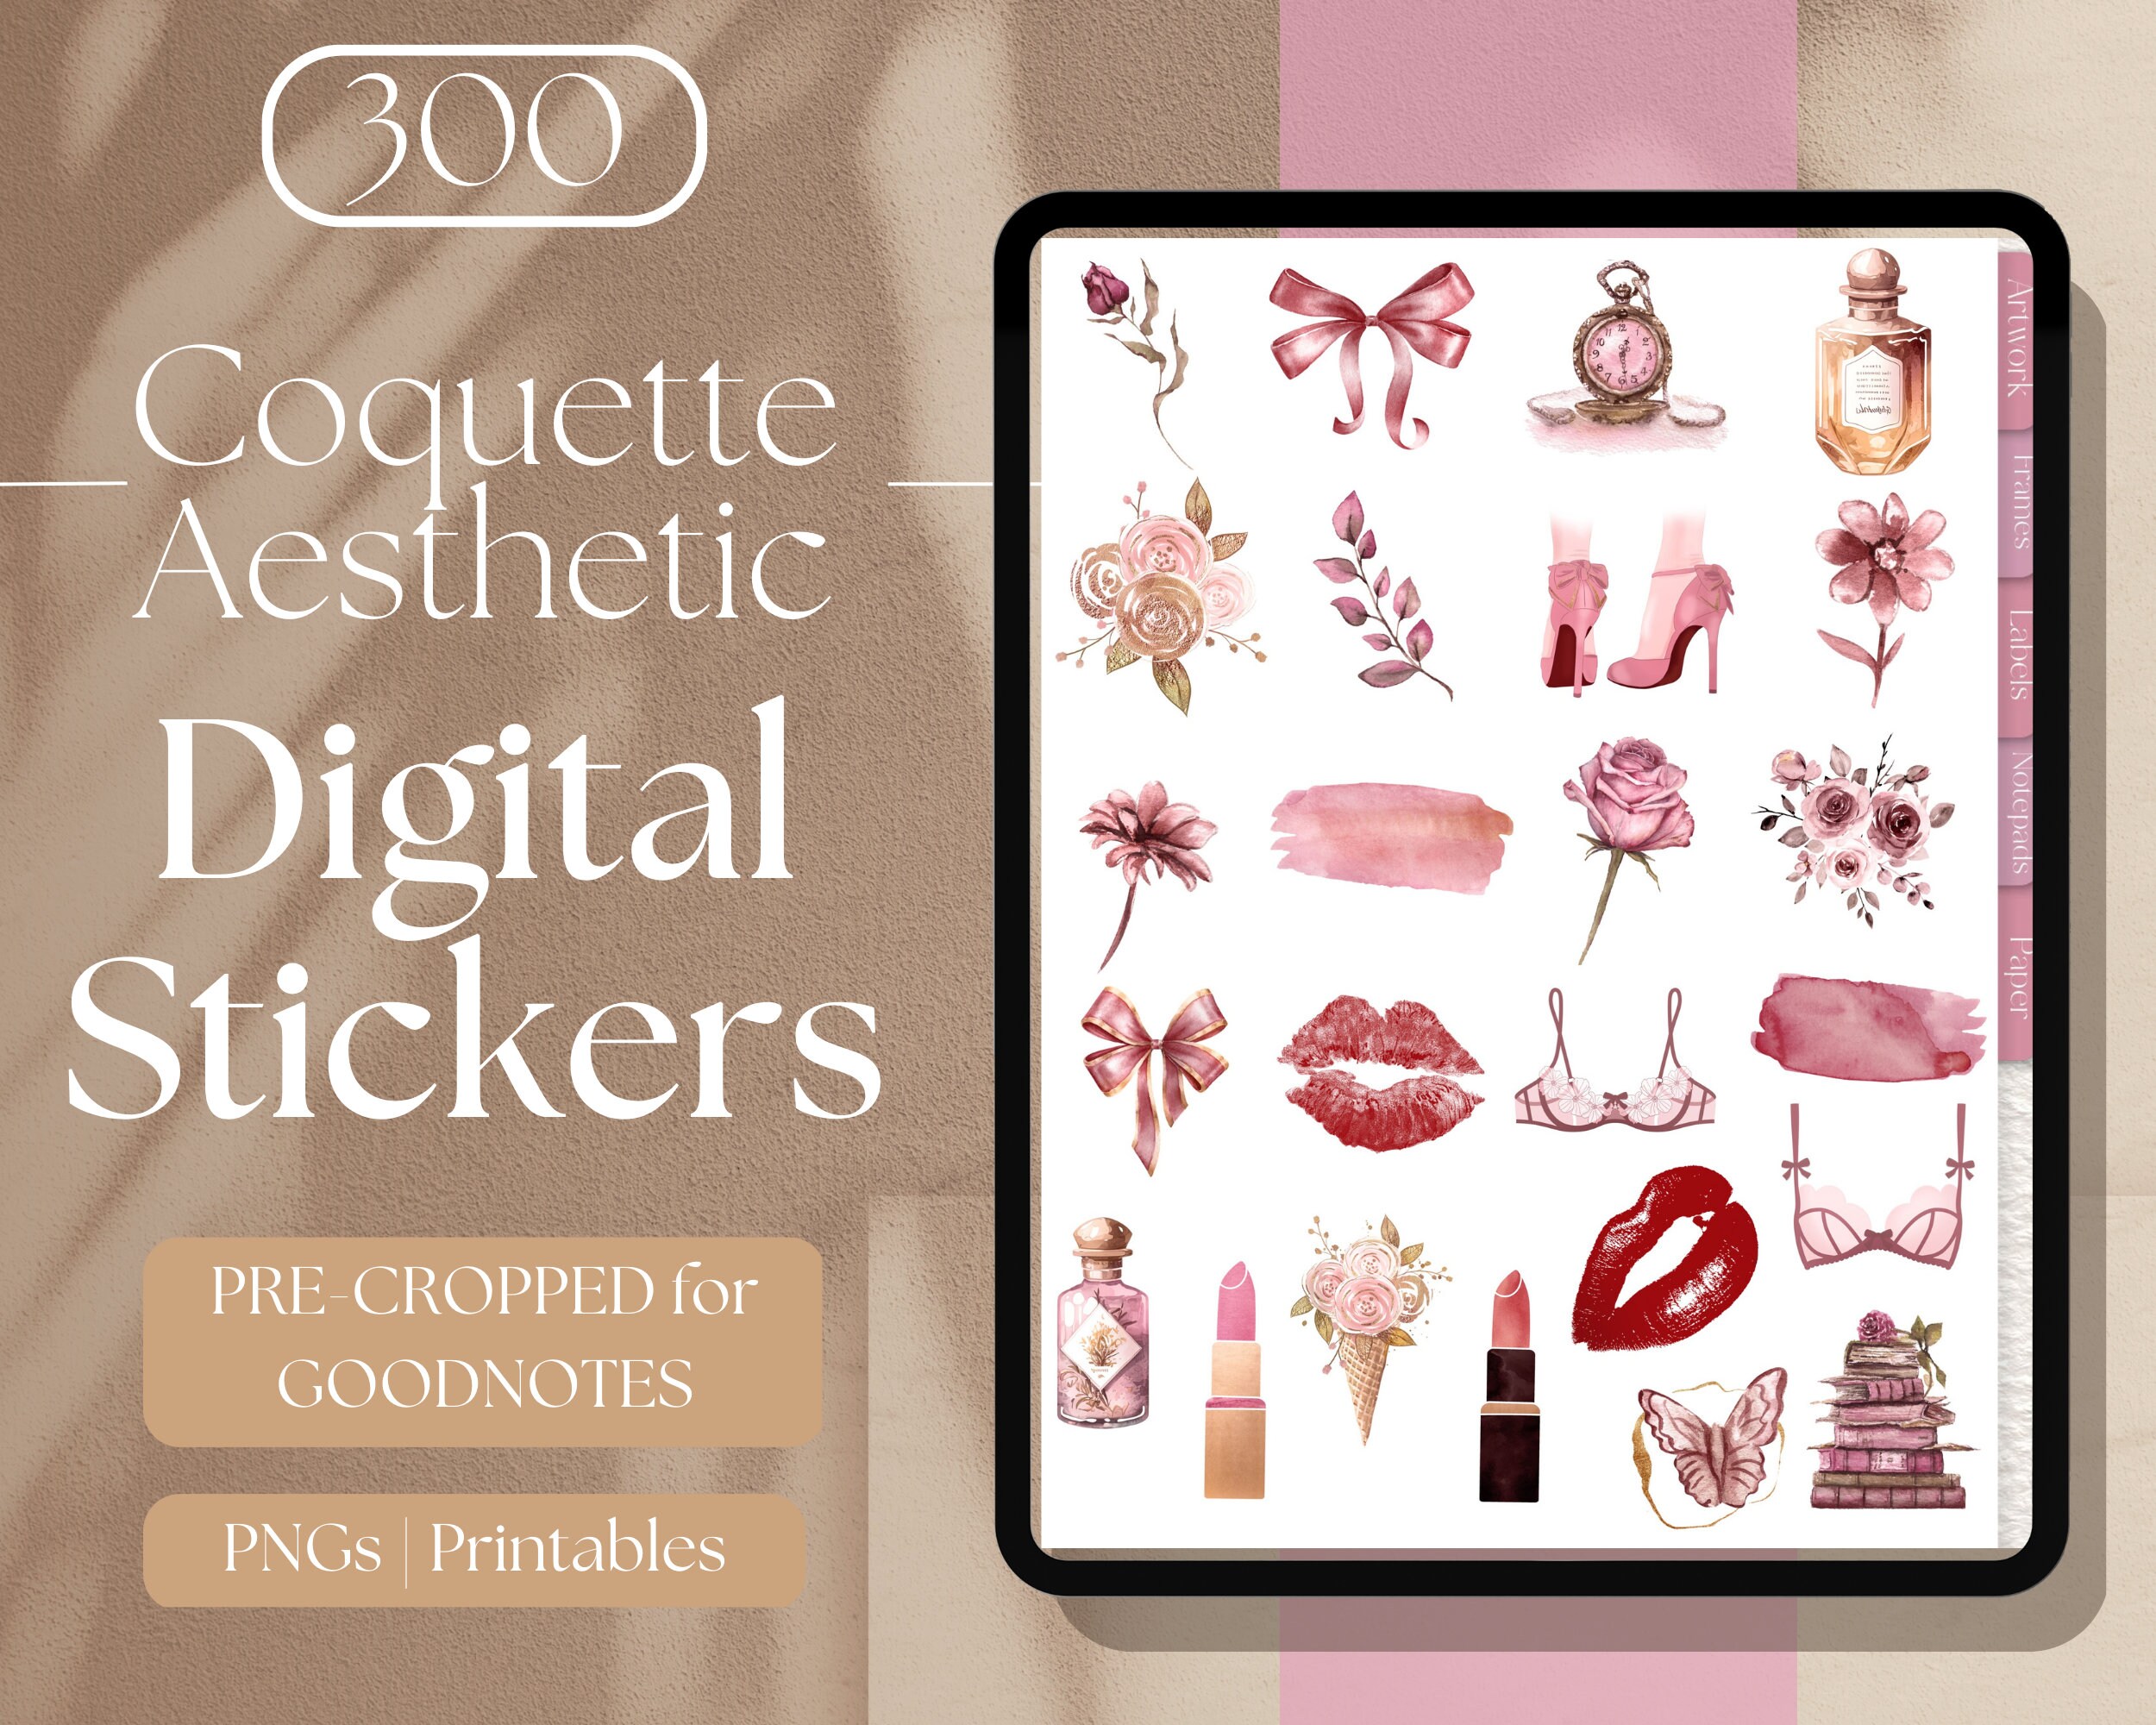 60pcs Coquette Stickers Pack, Aesthetic Graffiti Vinyl Waterproof Sticker  Decals For Water Bottle,Laptop,Phone,Skateboard,Scrapbooking Gifts For Adult